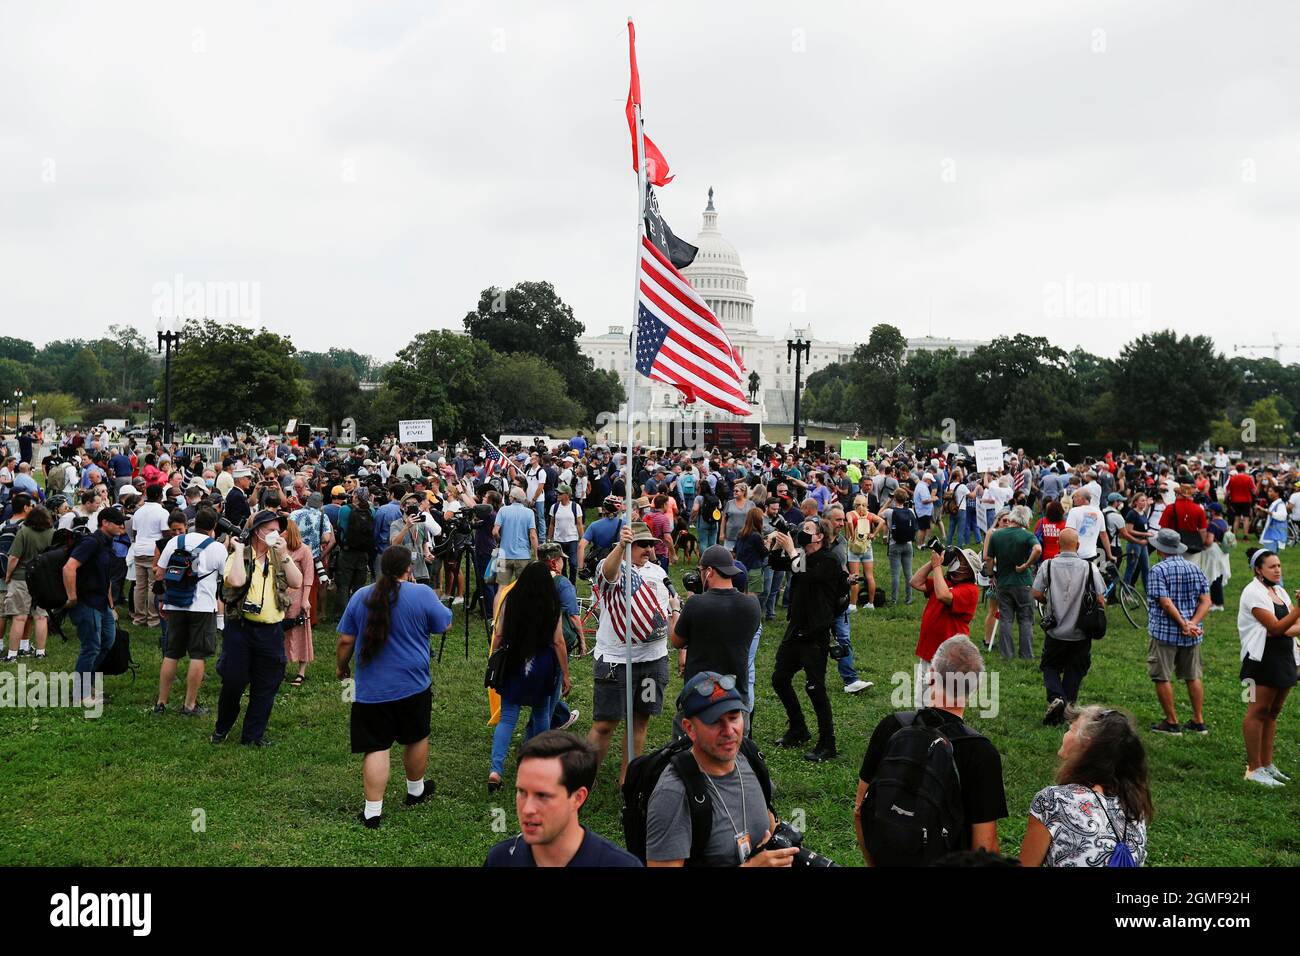 People gather in front of the U.S. Capitol during a protest in support of defendants being prosecuted in the January 6 attack on the Capitol, in Washington, U.S., September 18, 2021. REUTERS/Jim Bourg Stock Photo